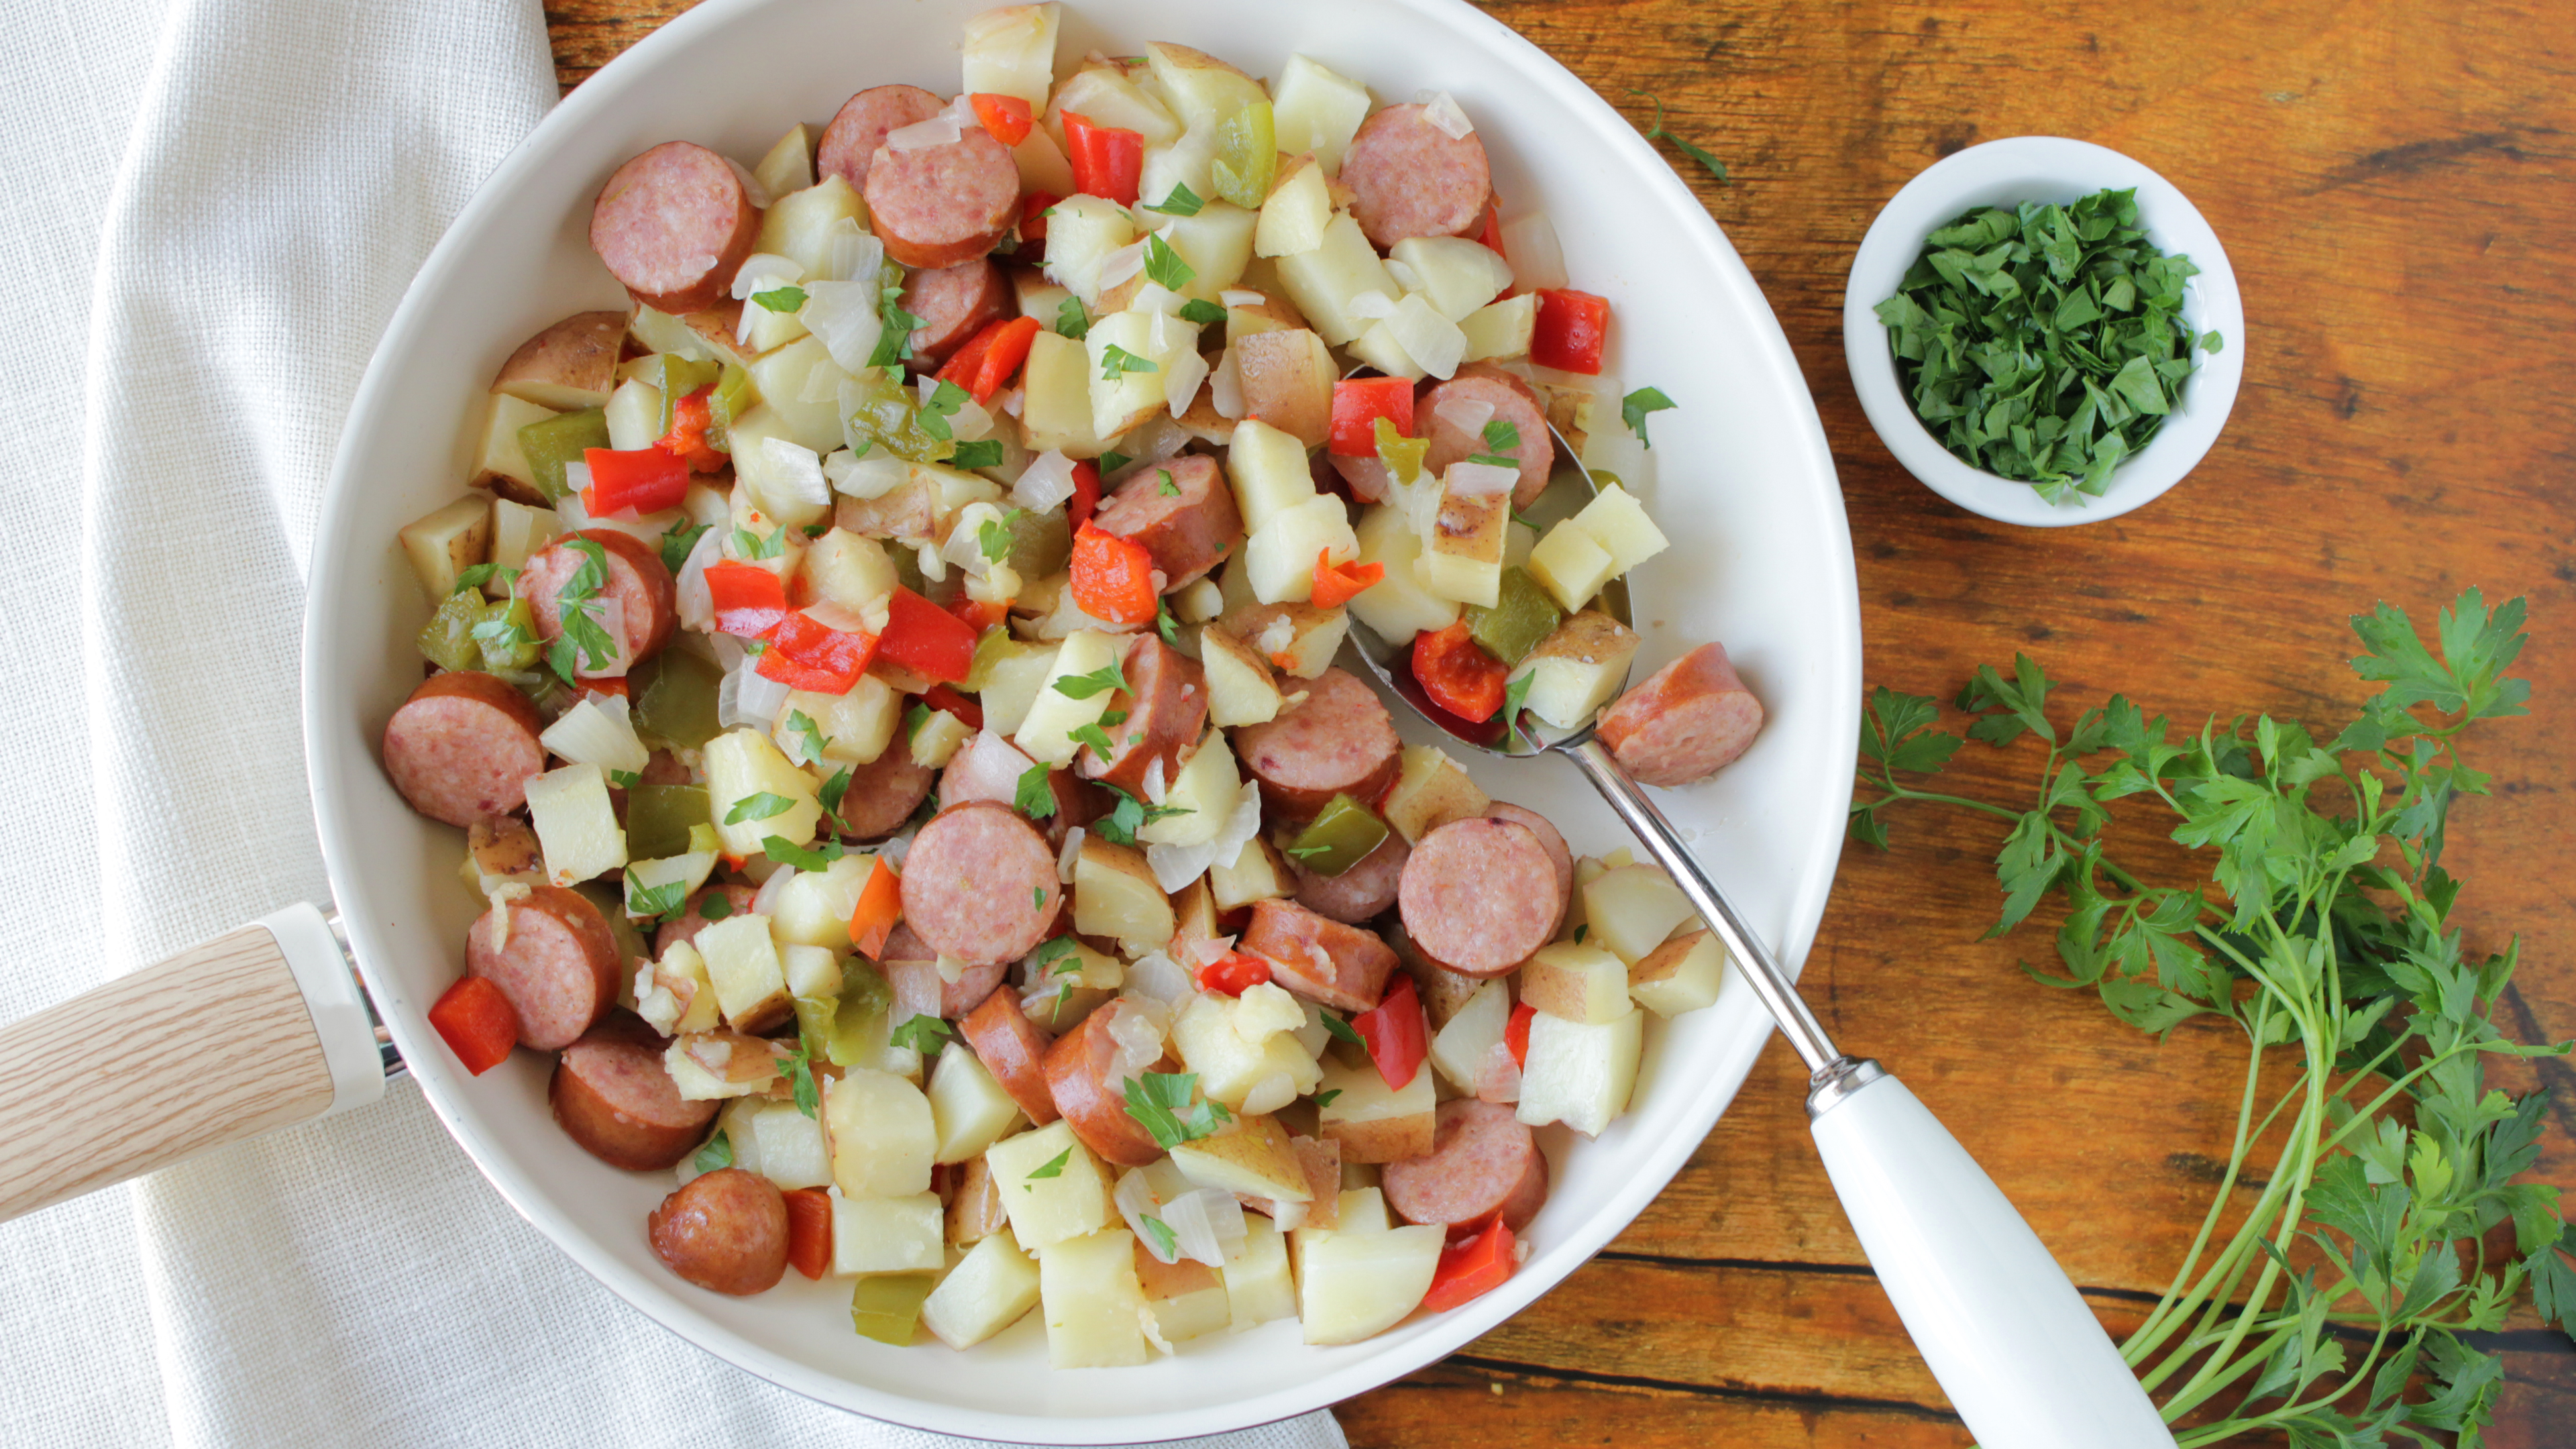 Ⓡ Healty SMOKED SAUSAGE, TATERS, PEPPERS AND ONIONS COUNTRY STYLE